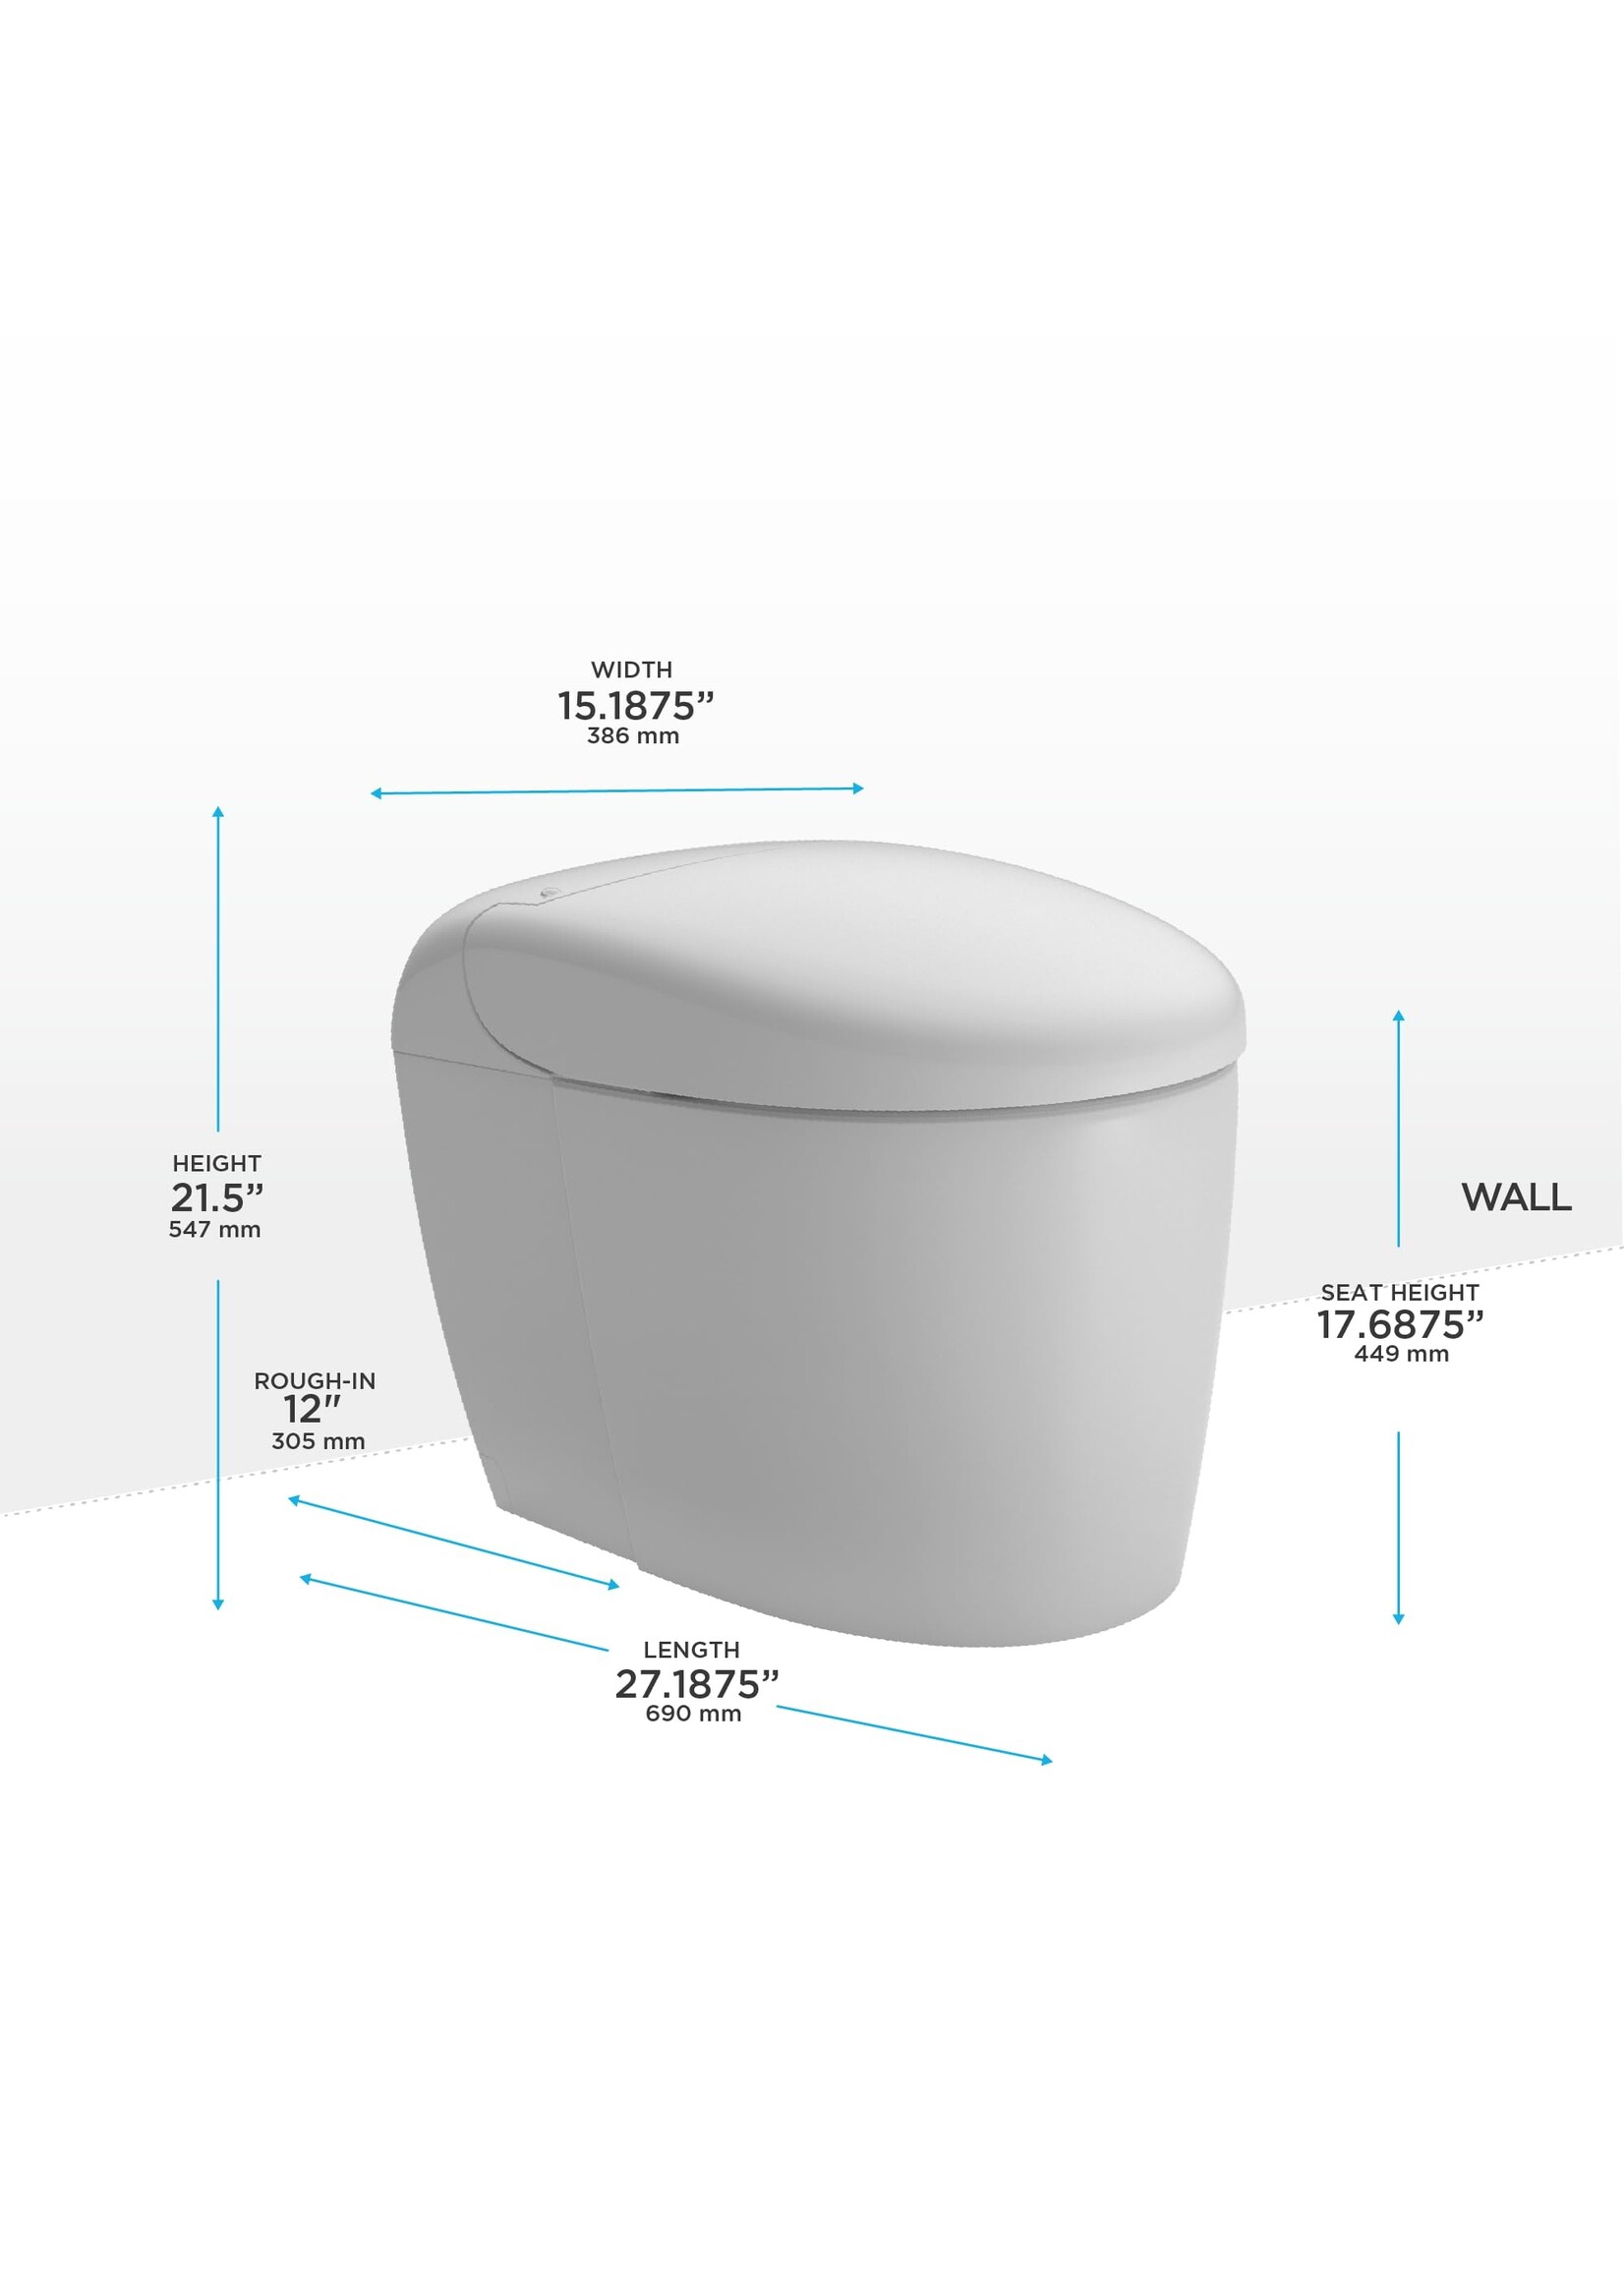 Toto Toto RS 1.0/0.8 Dual Flush System Neorest Toilet